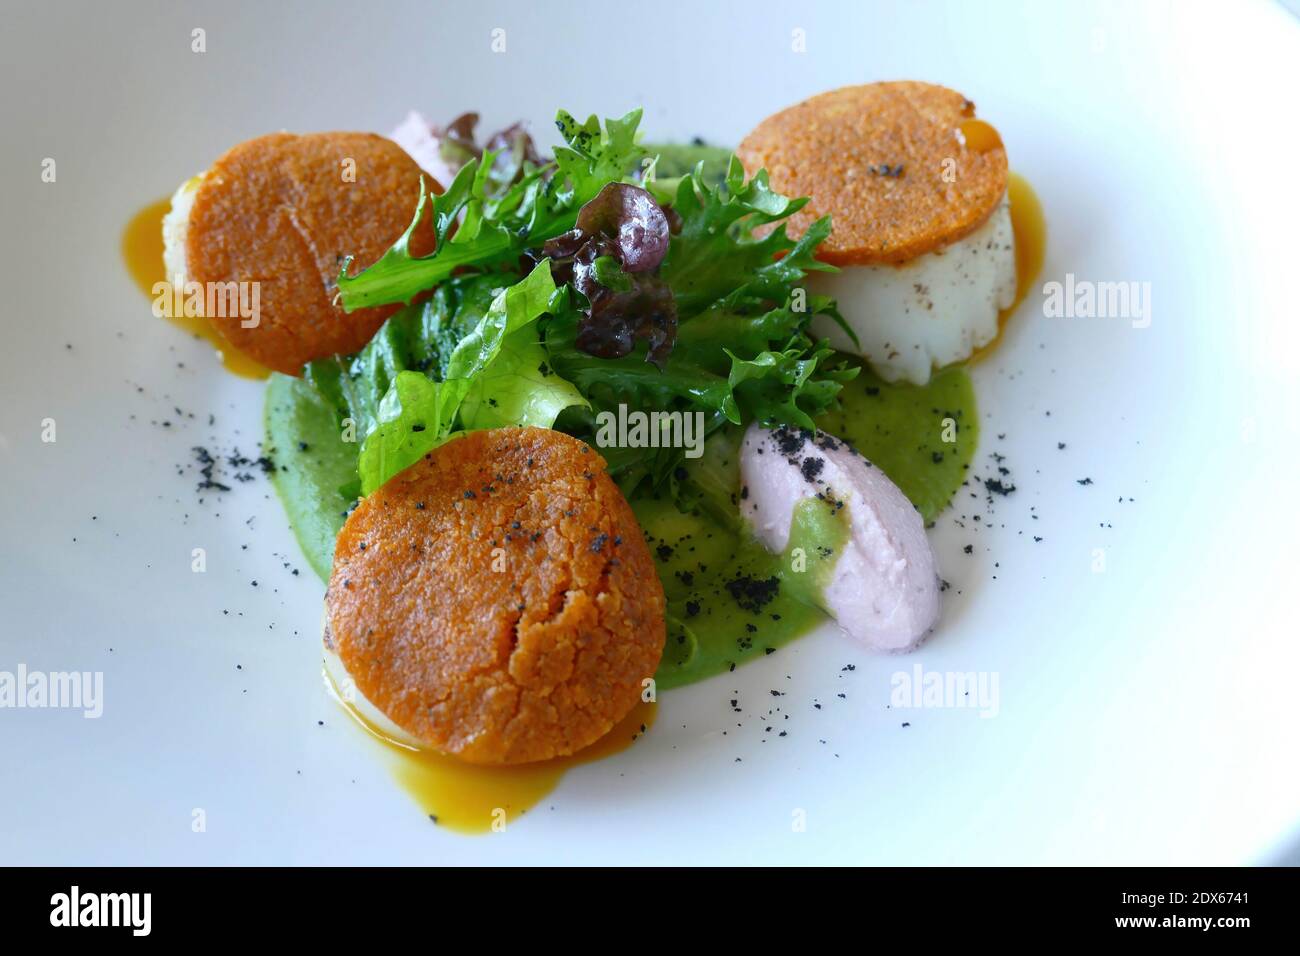 RABAT, MOROCCO - FEB 11, 2019 - Grilled scallop appetizer at a luxury restaurant in The View Hotel, Rabat, Morocco Stock Photo